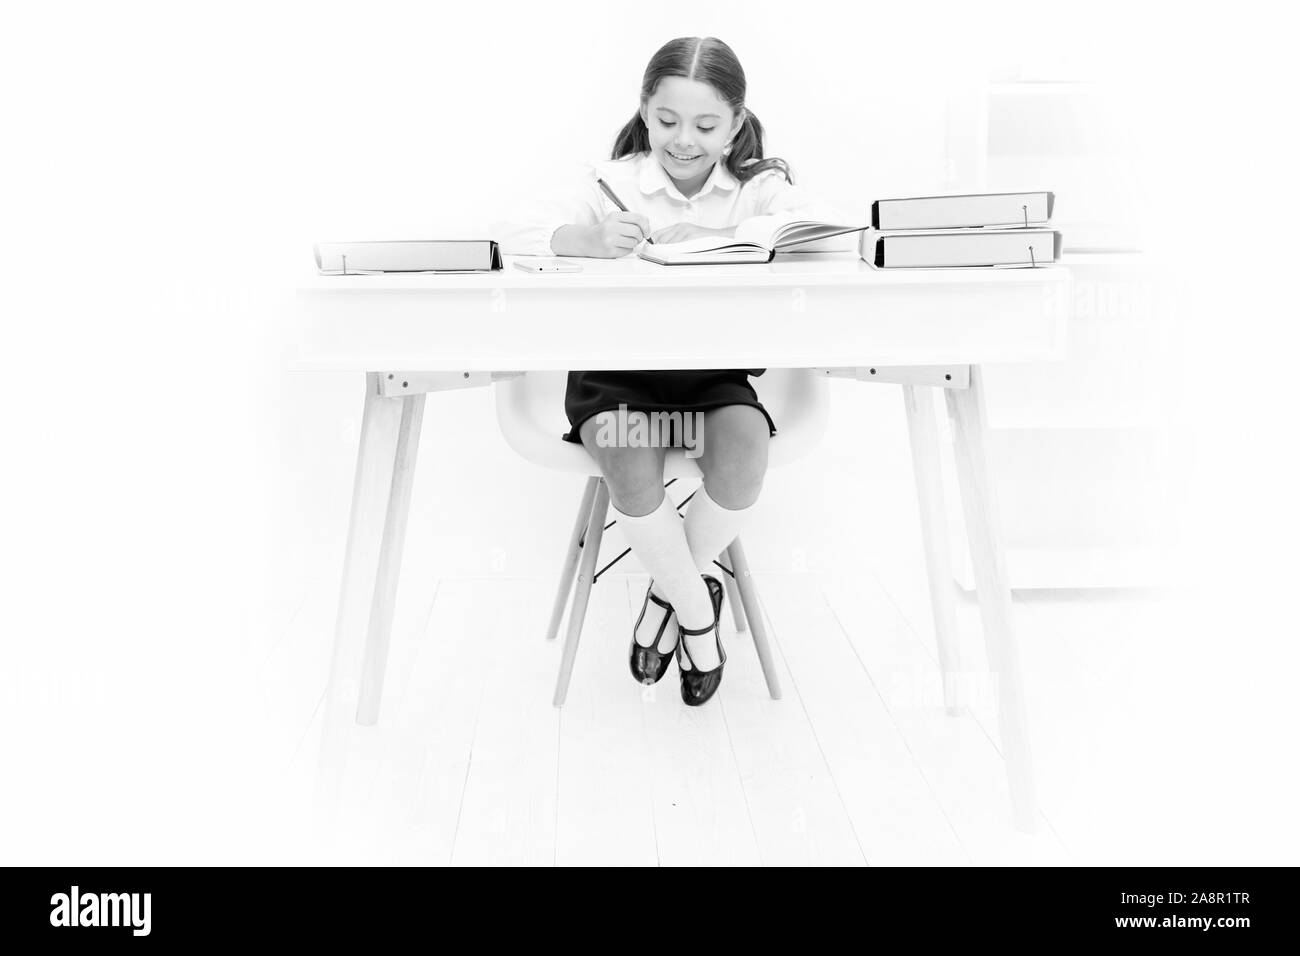 What should be height of study table. Schoolgirl doing homework at table. Adorable pupil little girl studying at table white background. Studying on desk with incorrect height can lead back pain. Stock Photo